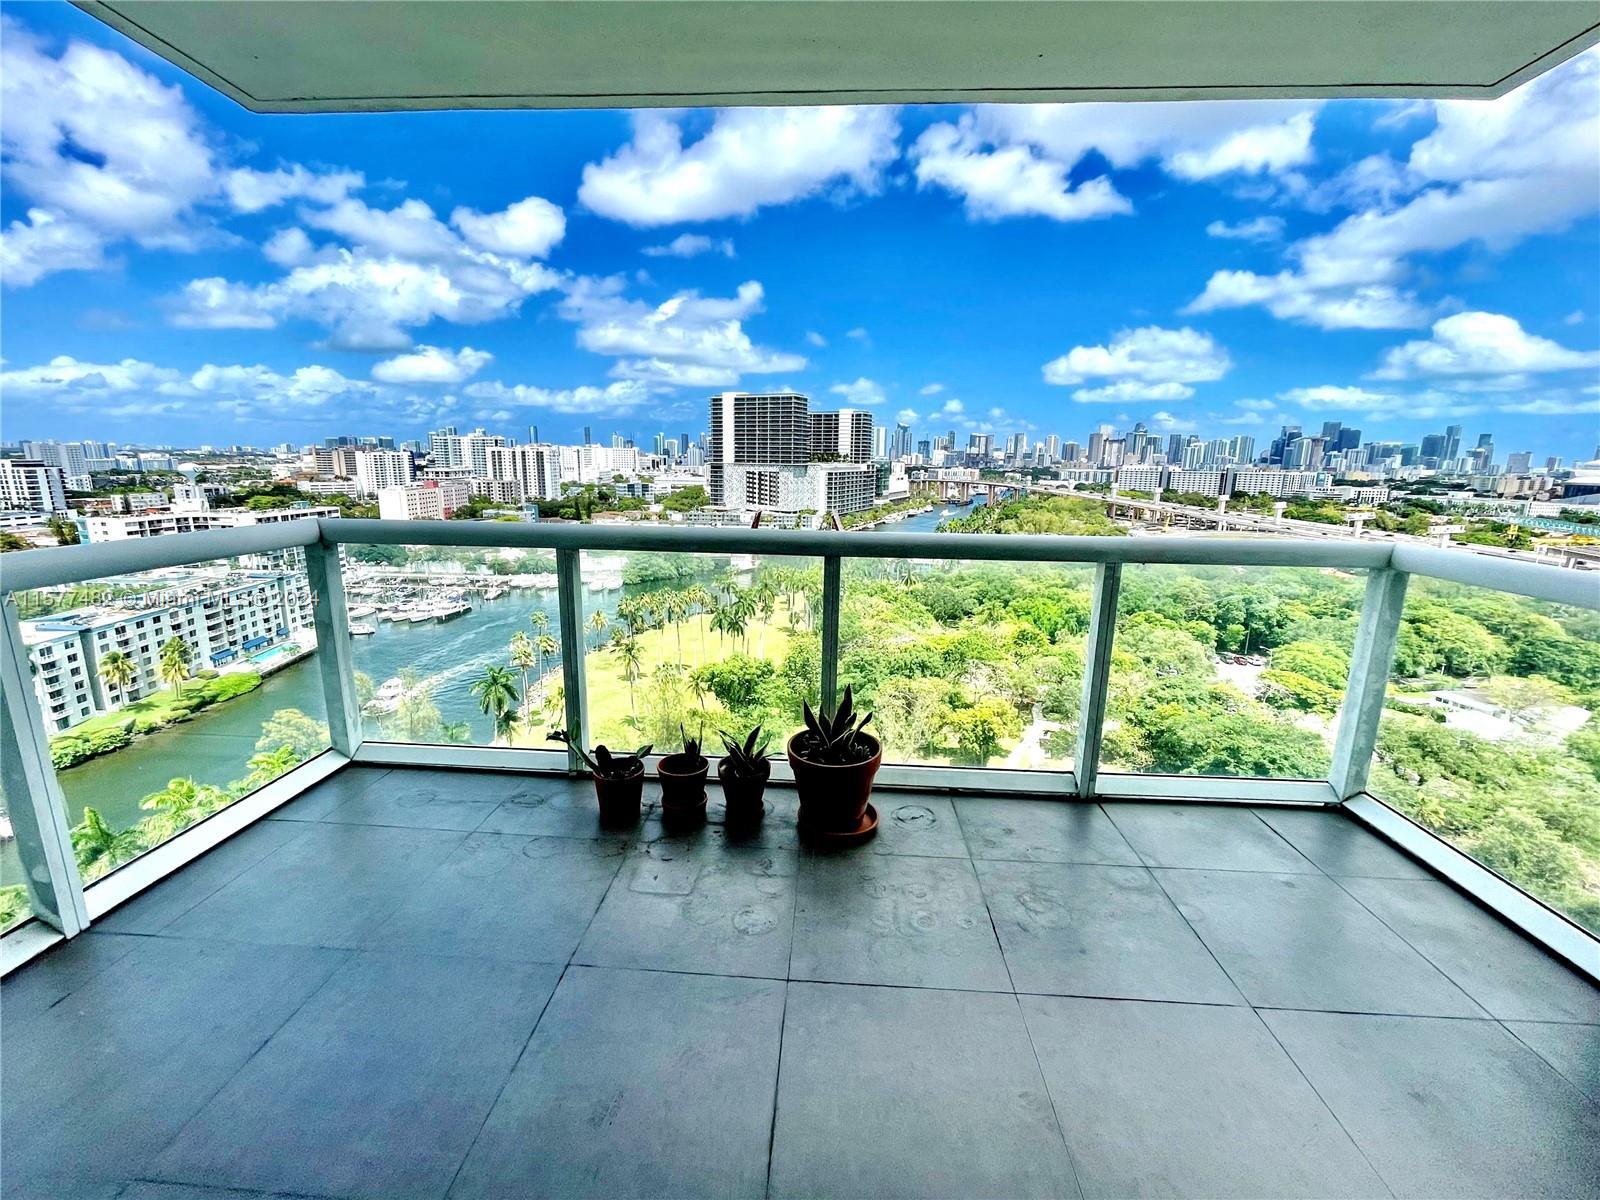 Photo of 1861 NW S River Dr #1908 in Miami, FL